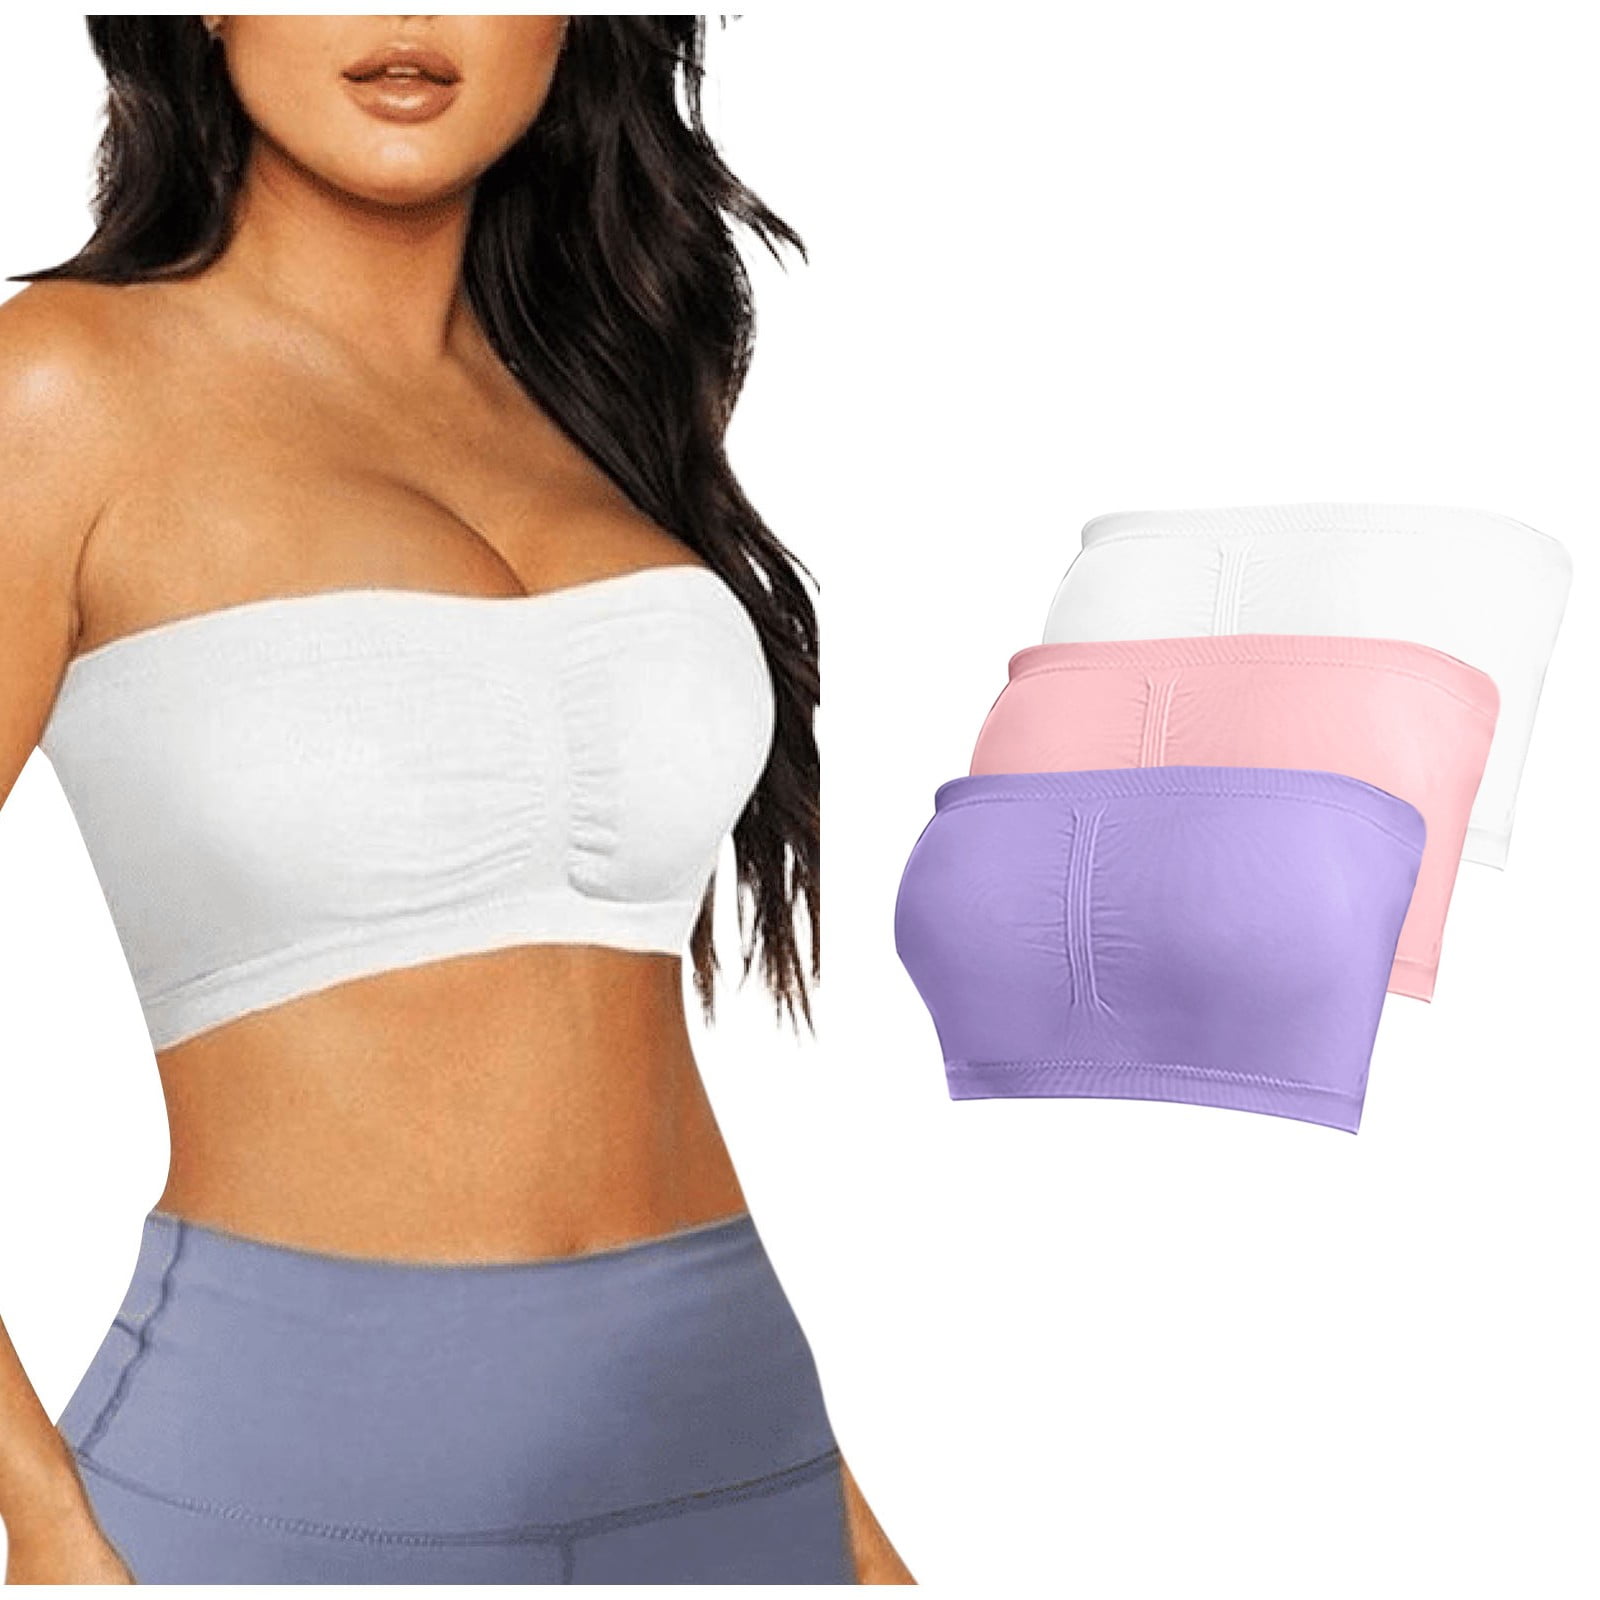 Qcmgmg Plus Size Wireless Bras Bandeaus Push Up Strapless Bralette Solid  Color Tube Top Plus Size Bra 